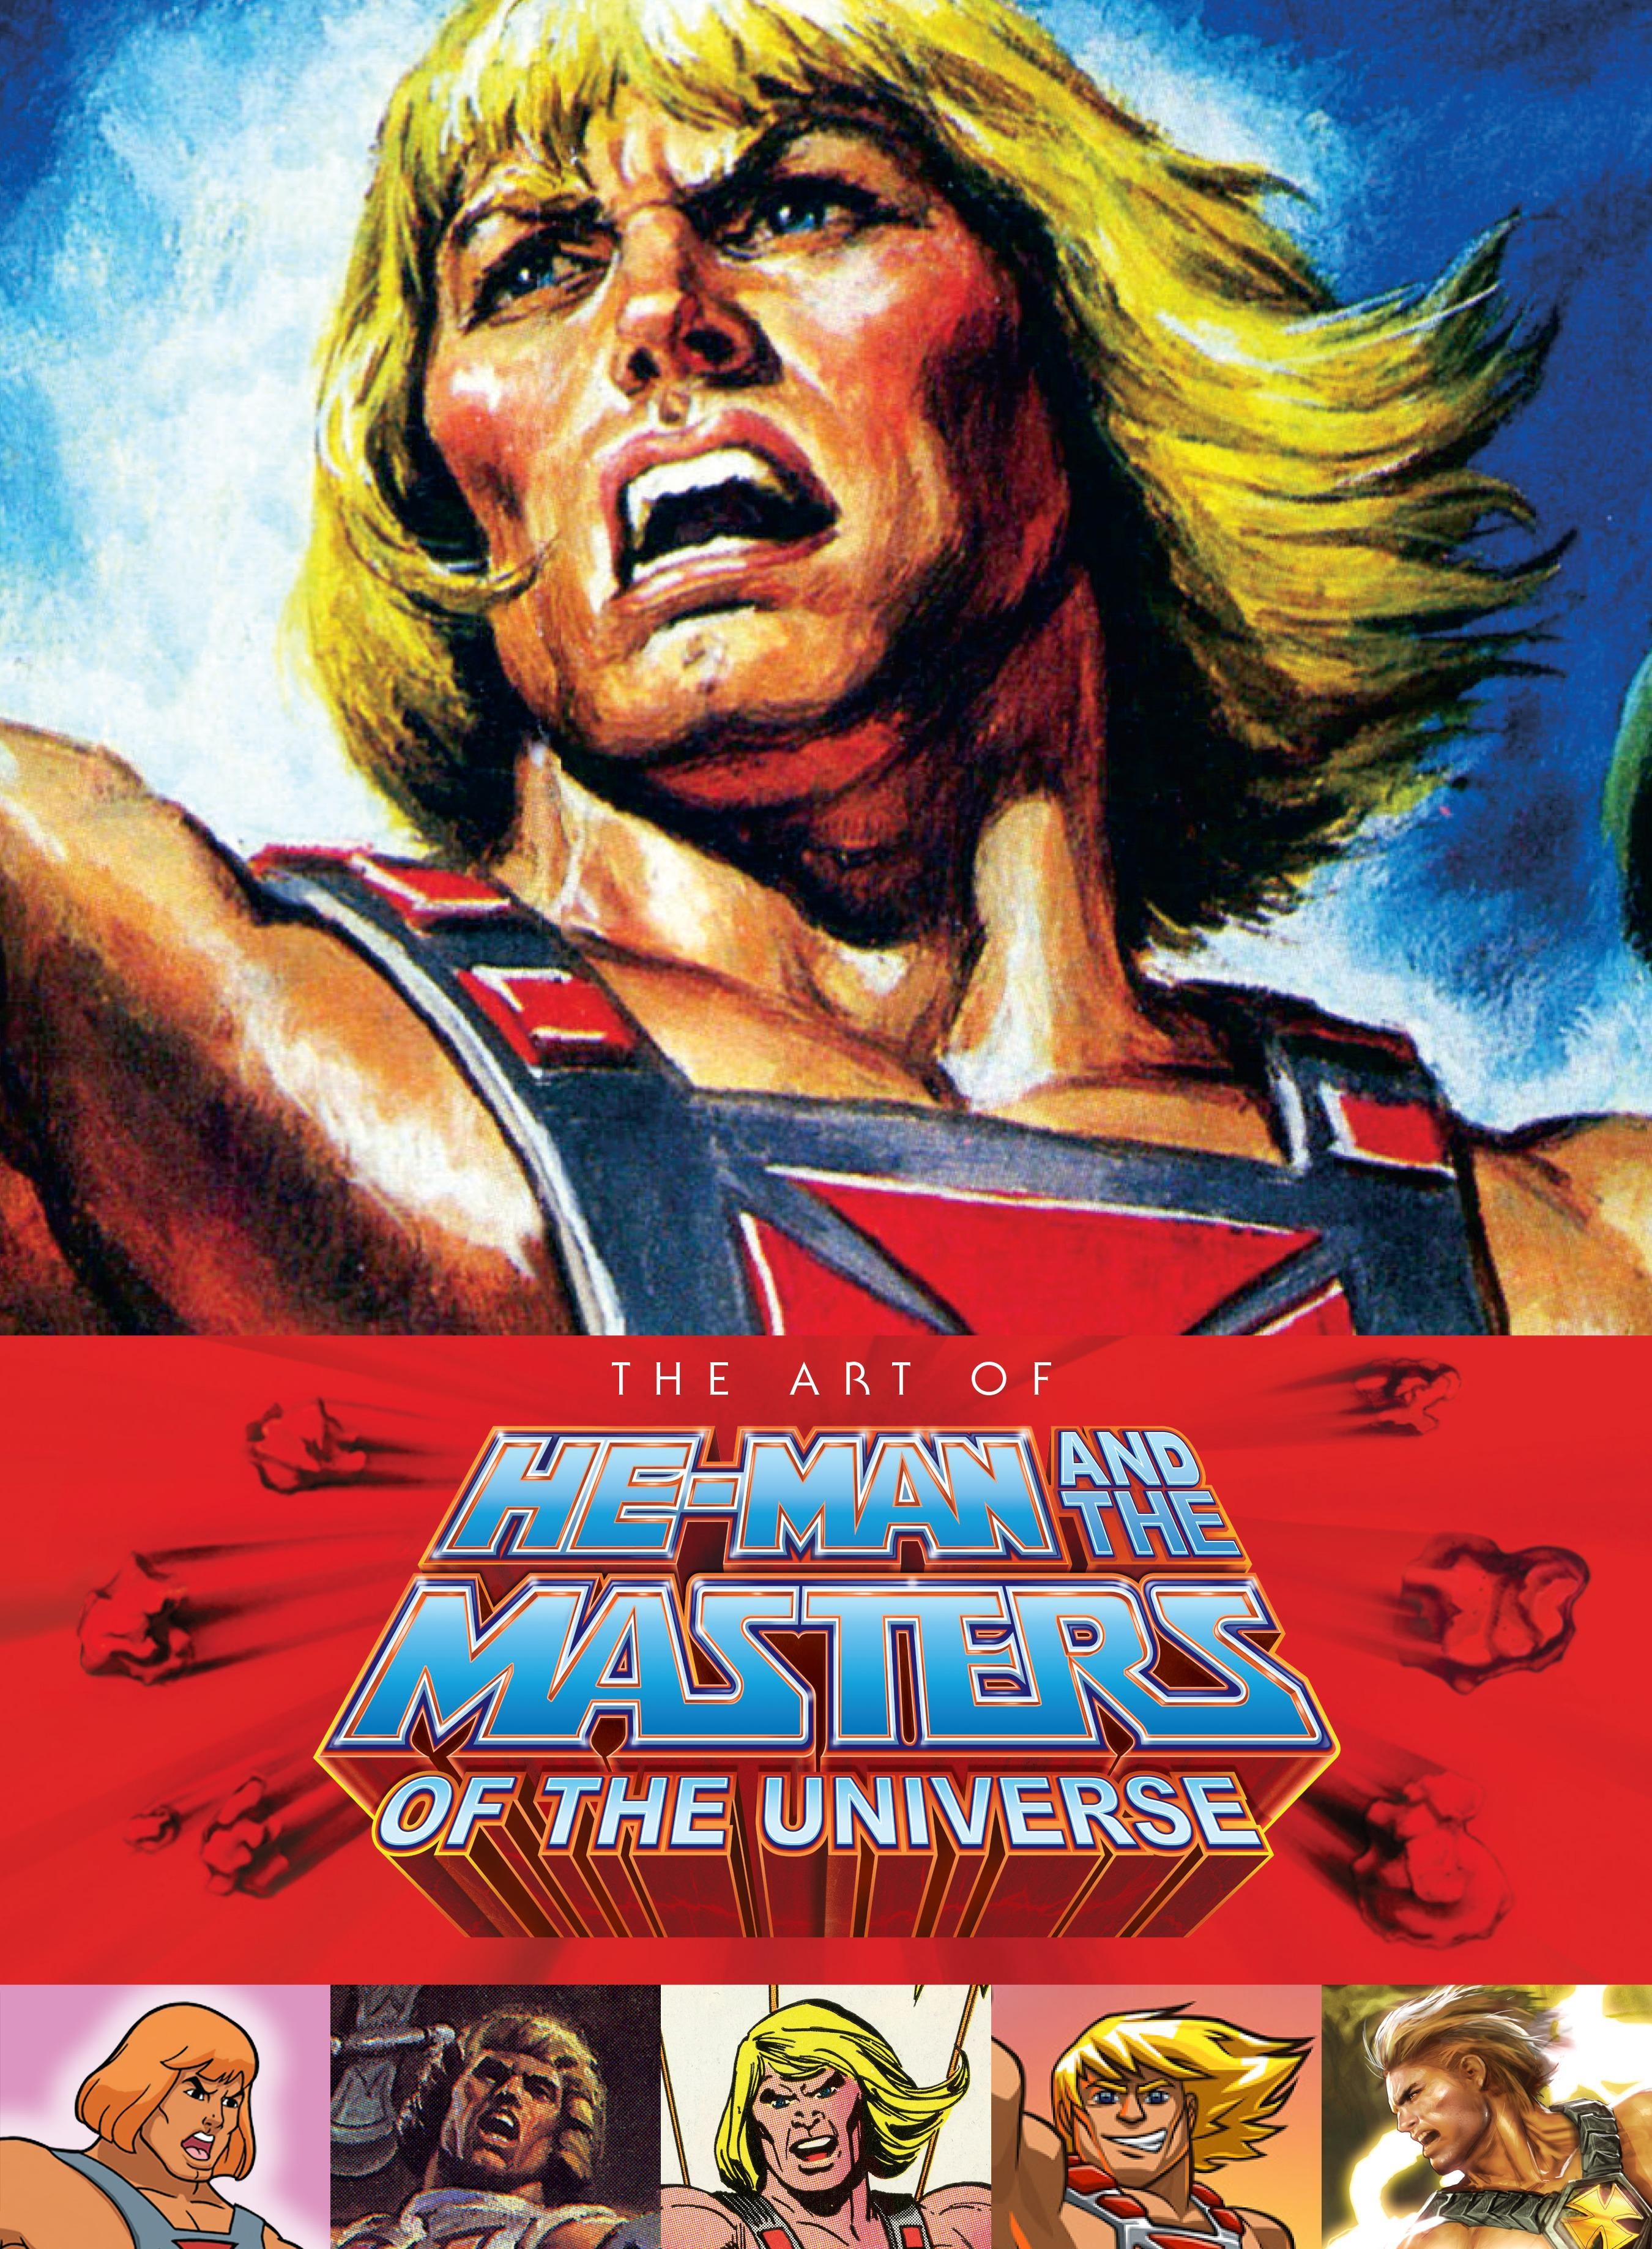 The Art of He Man and the Masters of the Universe / Buch / Einband - fest (Hardcover) / Englisch / 2015 / Random House LLC US / EAN 9781616555924